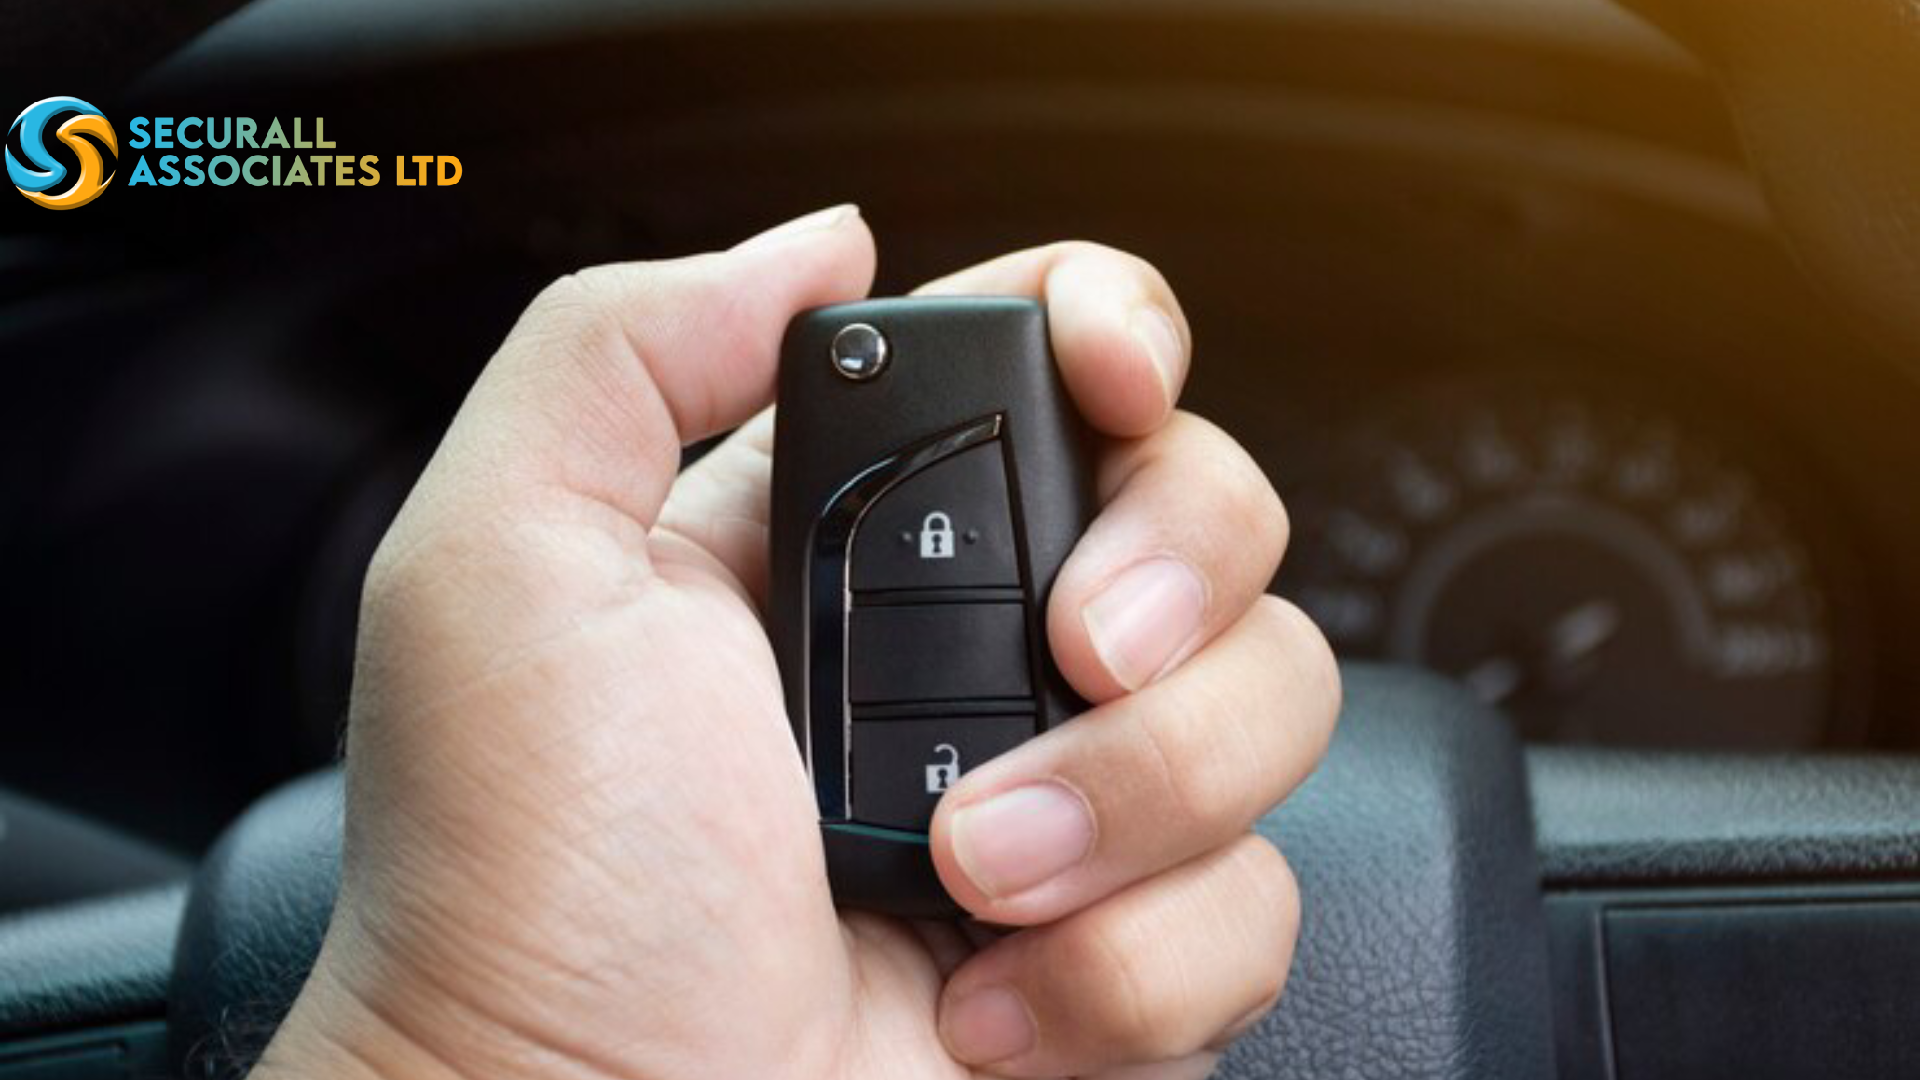 Opt for Our 24/7 Emergency Car Lockout Solution: